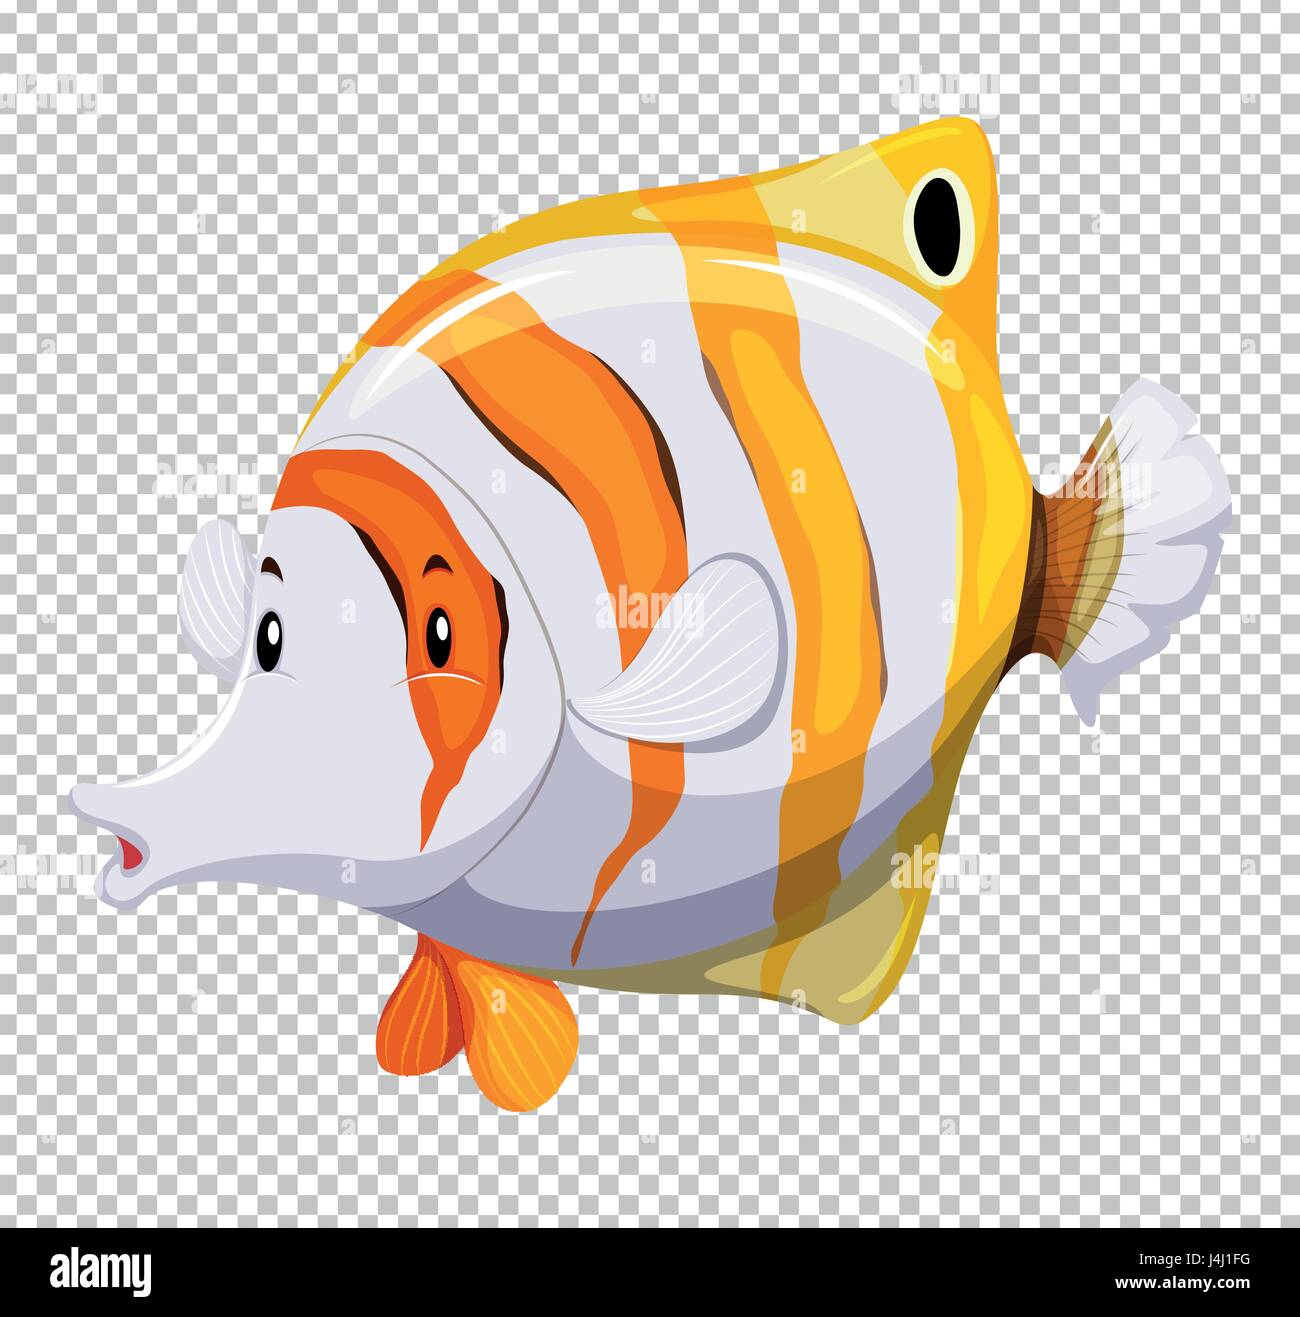 Cute fish on transparent background illustration Stock Vector